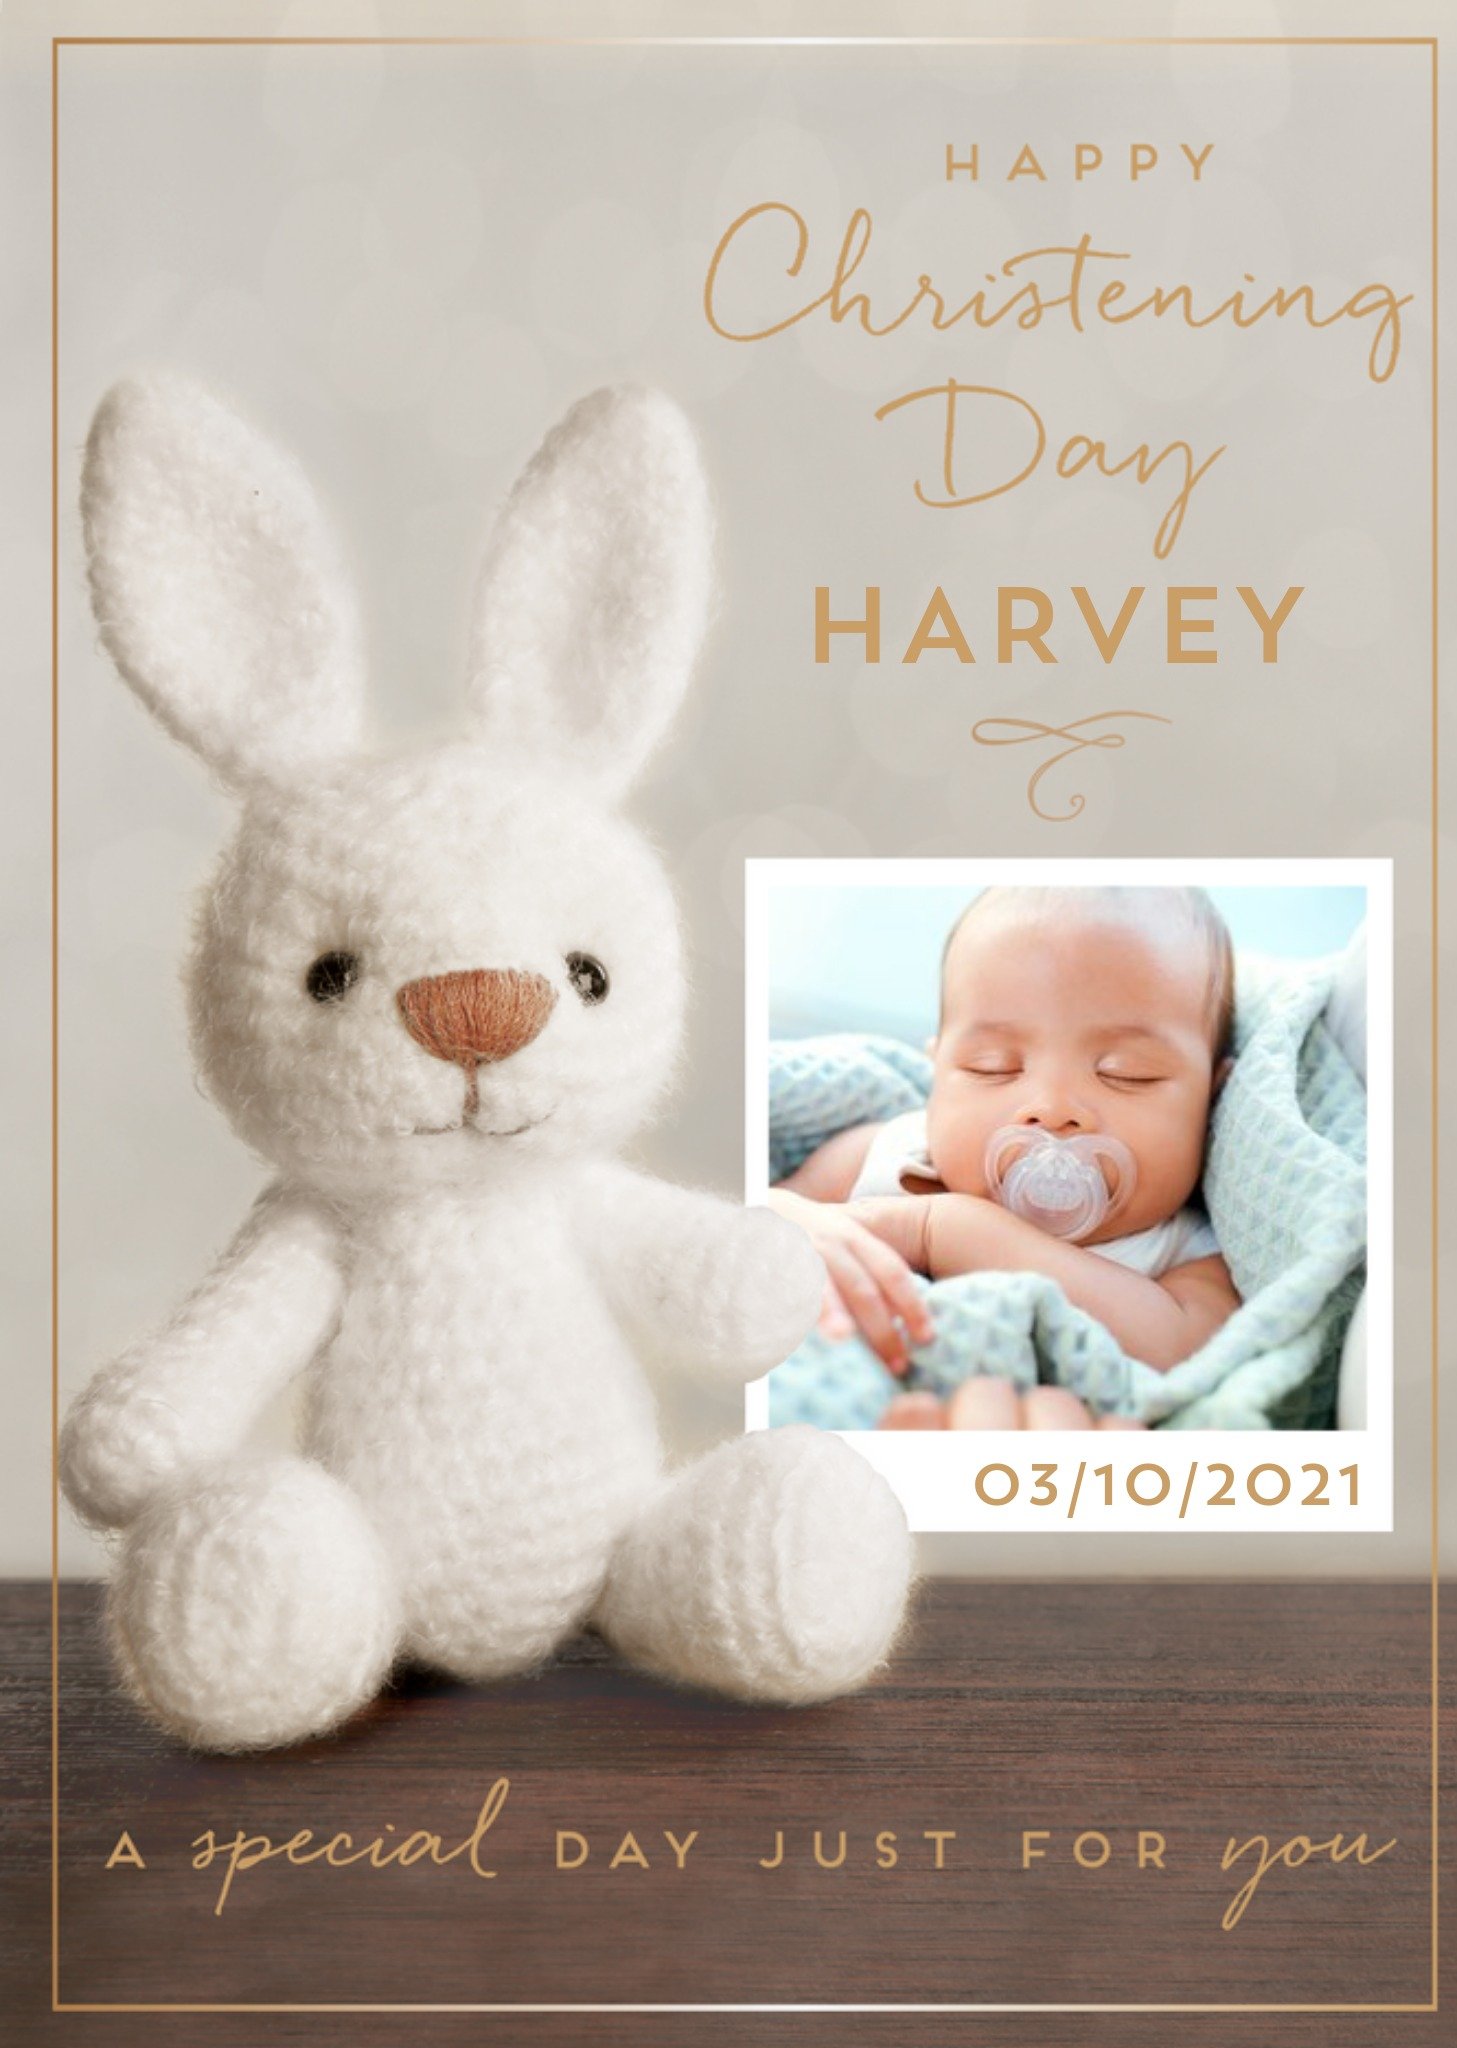 Moonpig Cute Special Day For You Photo Upload Christening Day Card, Large